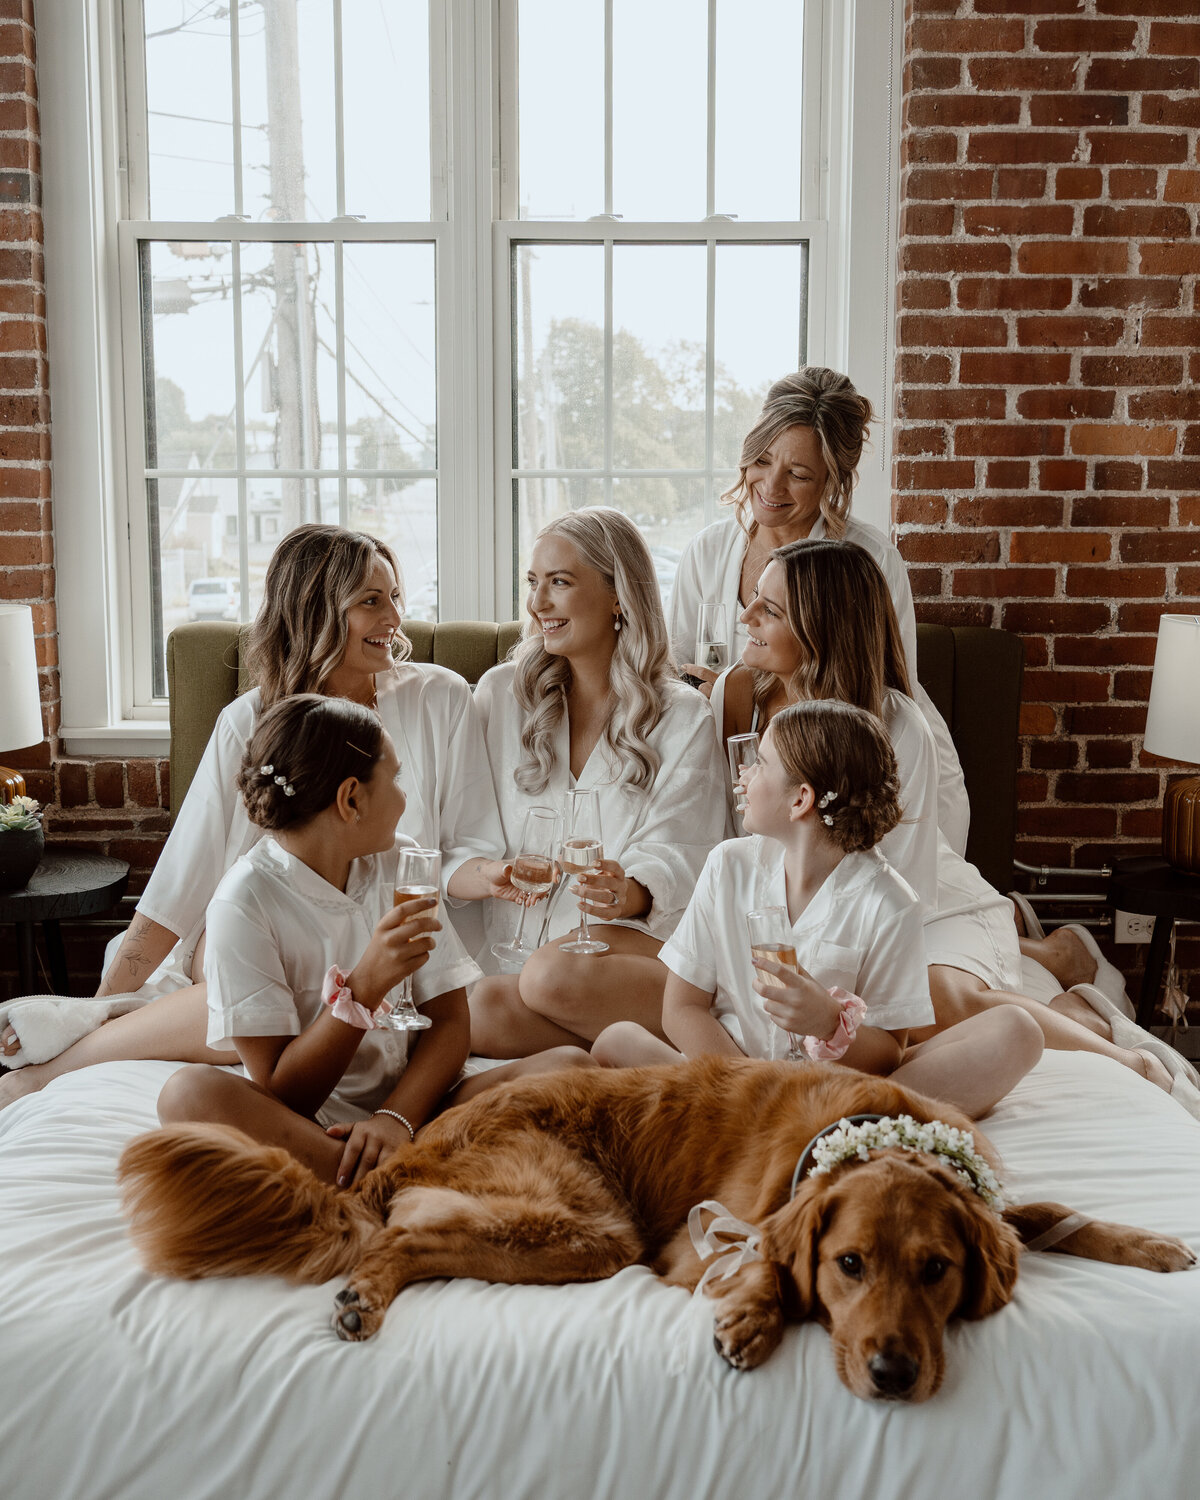 Bride and bridesmaids in matching robes share a joyful moment with champagne glasses, accompanied by a flower-adorned dog, on a cozy bed in a room with brick walls and large windows